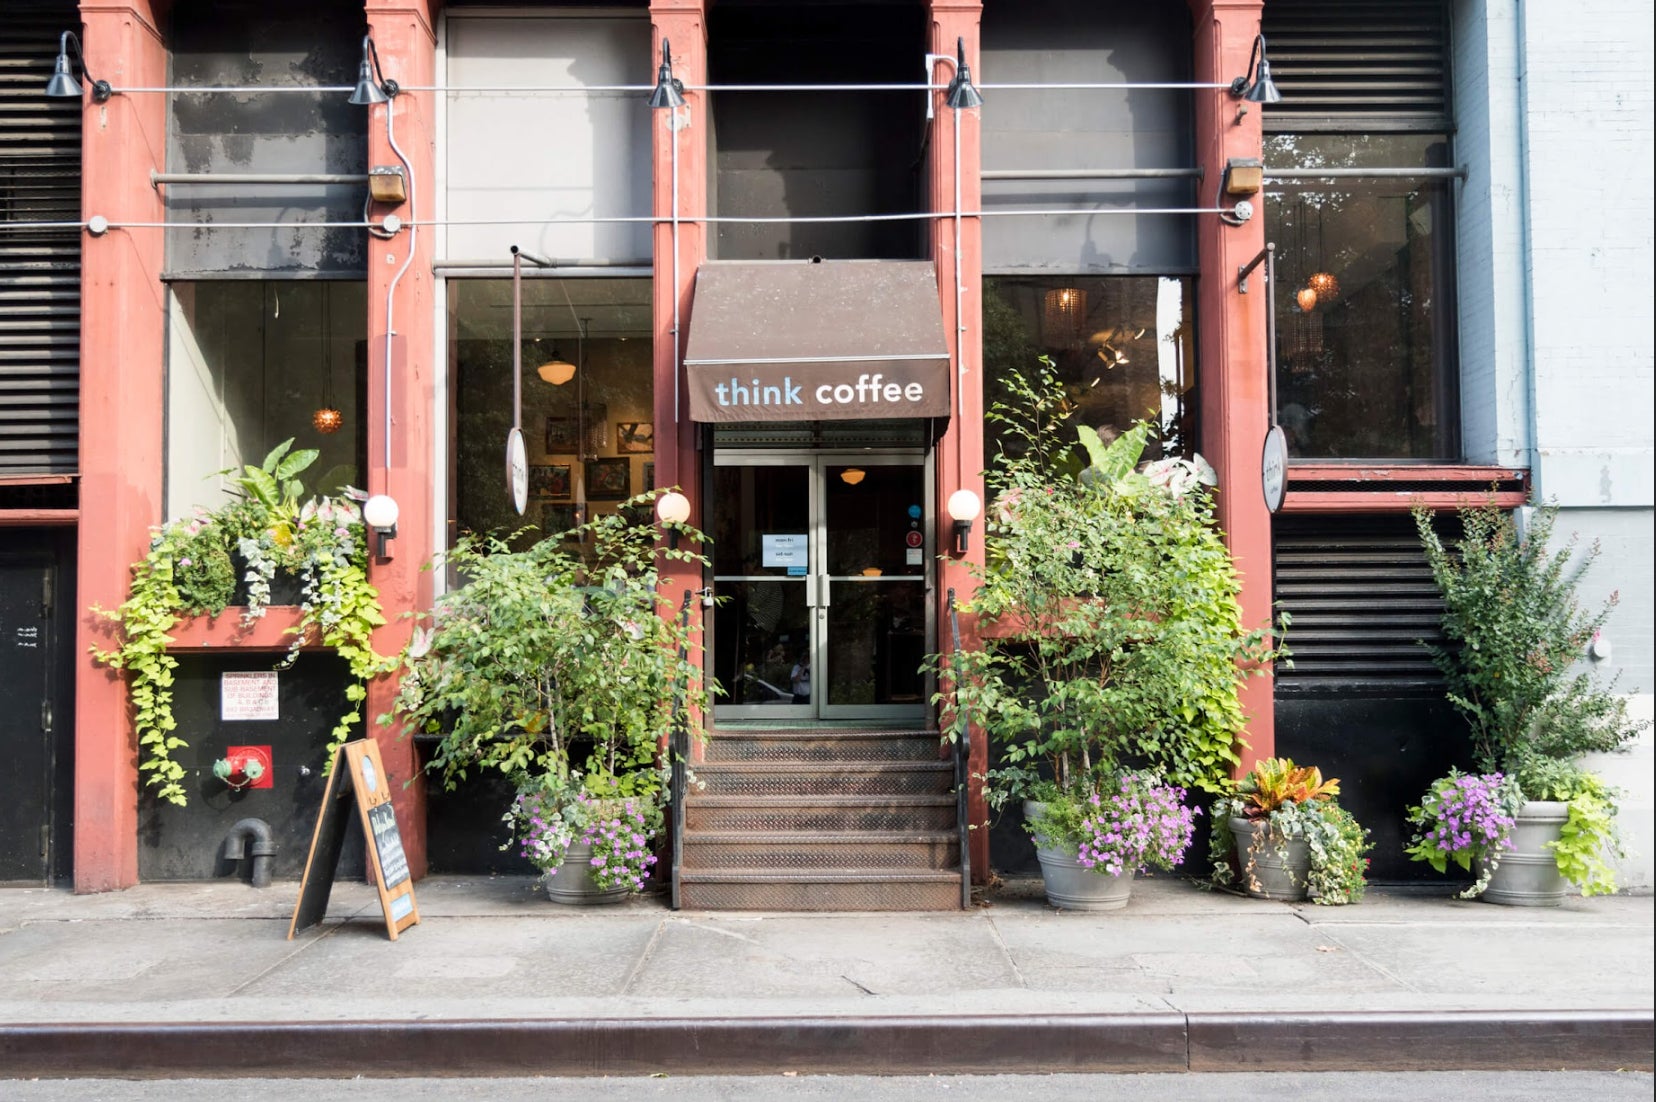 NY’s Finest! World’s Most Sustainable “think coffee” to Open on 6/30